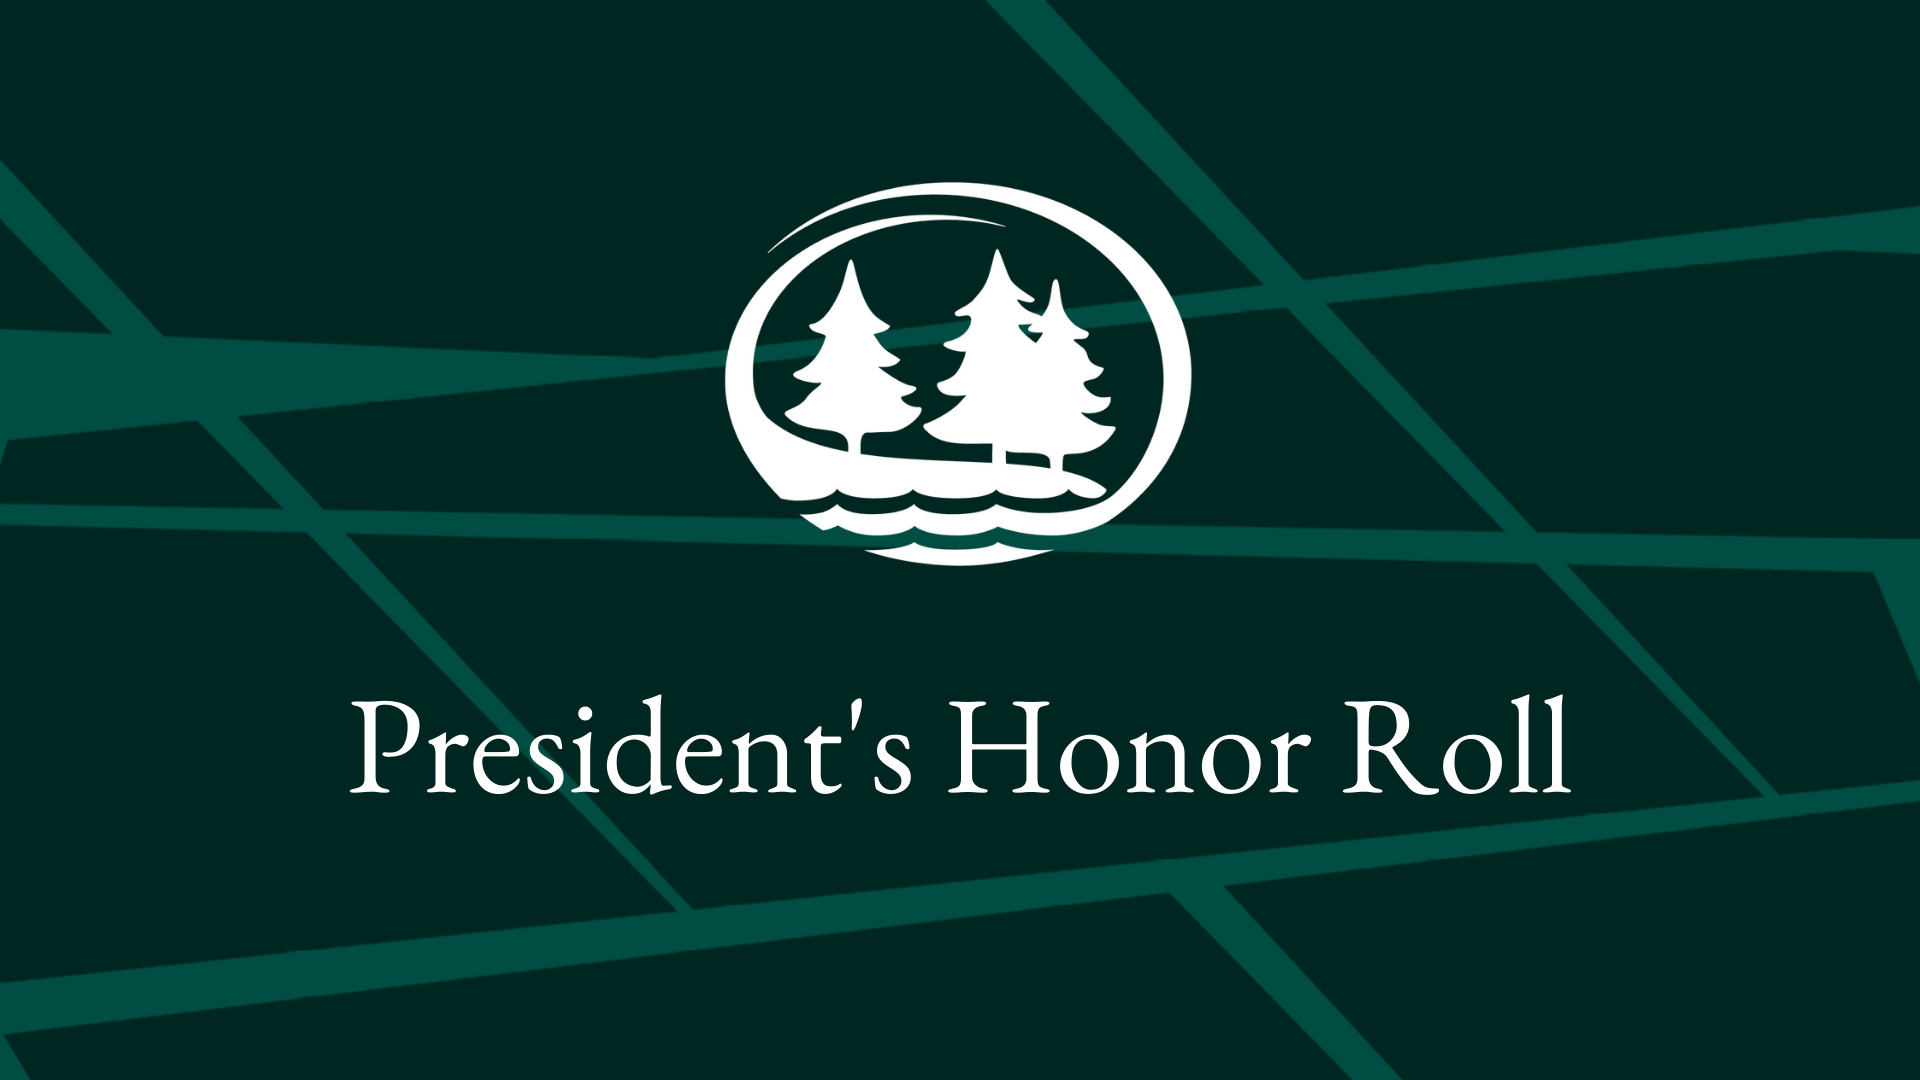 President's Honor Roll graphic